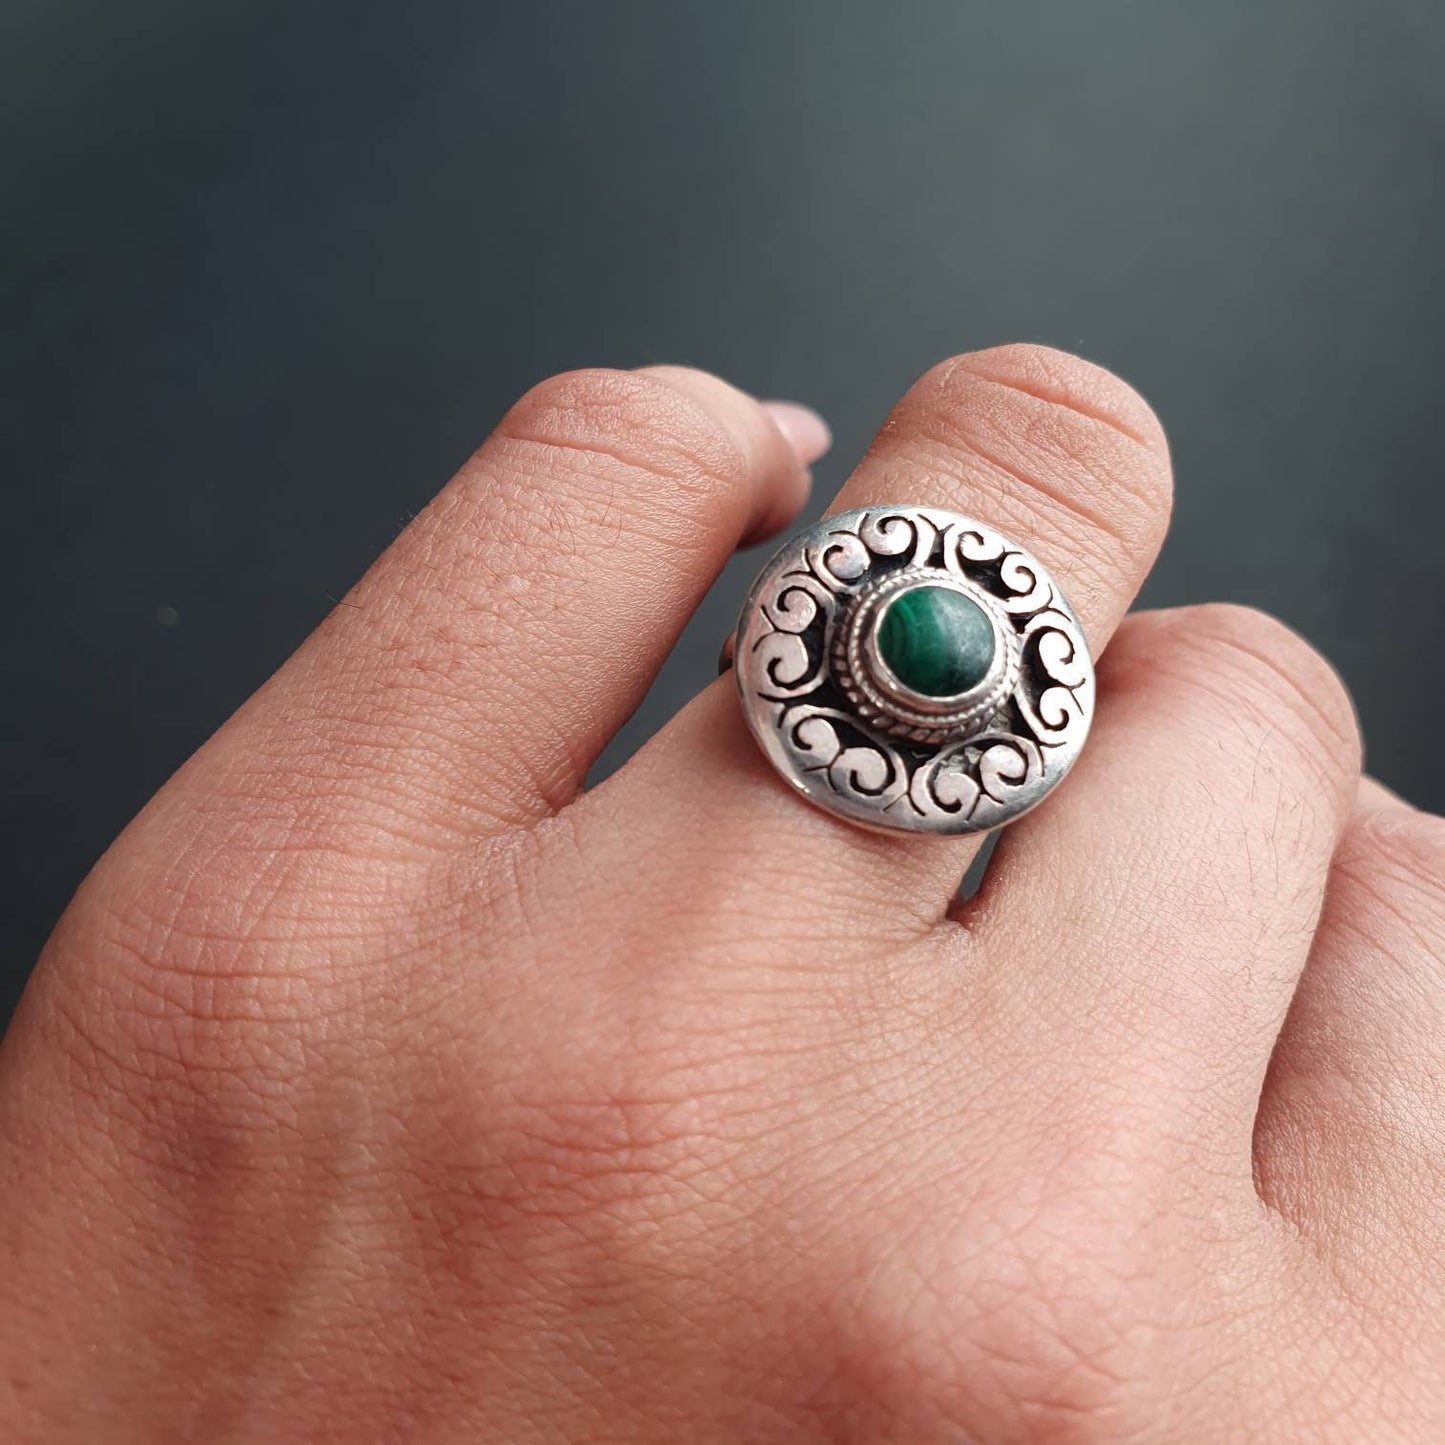 Malachite ring, statement ring,Ethnic ring, Boho Ring, antique victorian sterling silver jewellery, statement ring unisex gifts